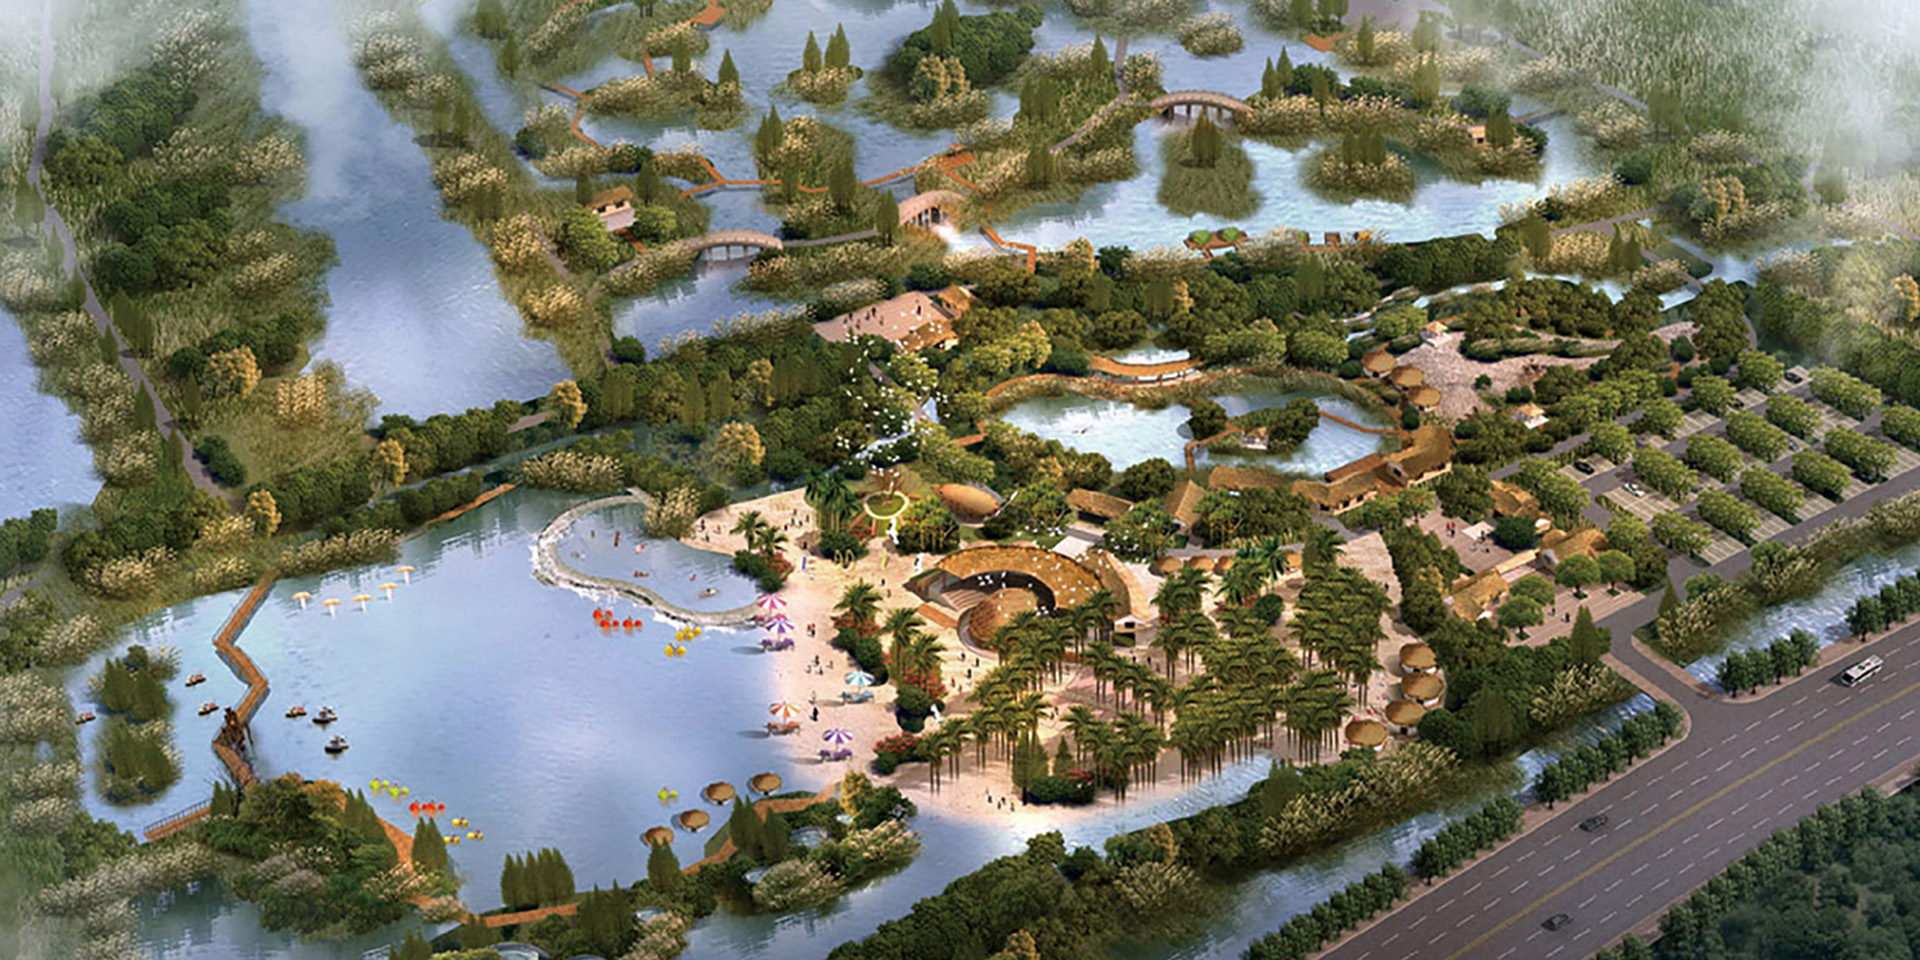 Planning Of The Wetland Wild Experience Project Of Hangzhou Bay National Wetland